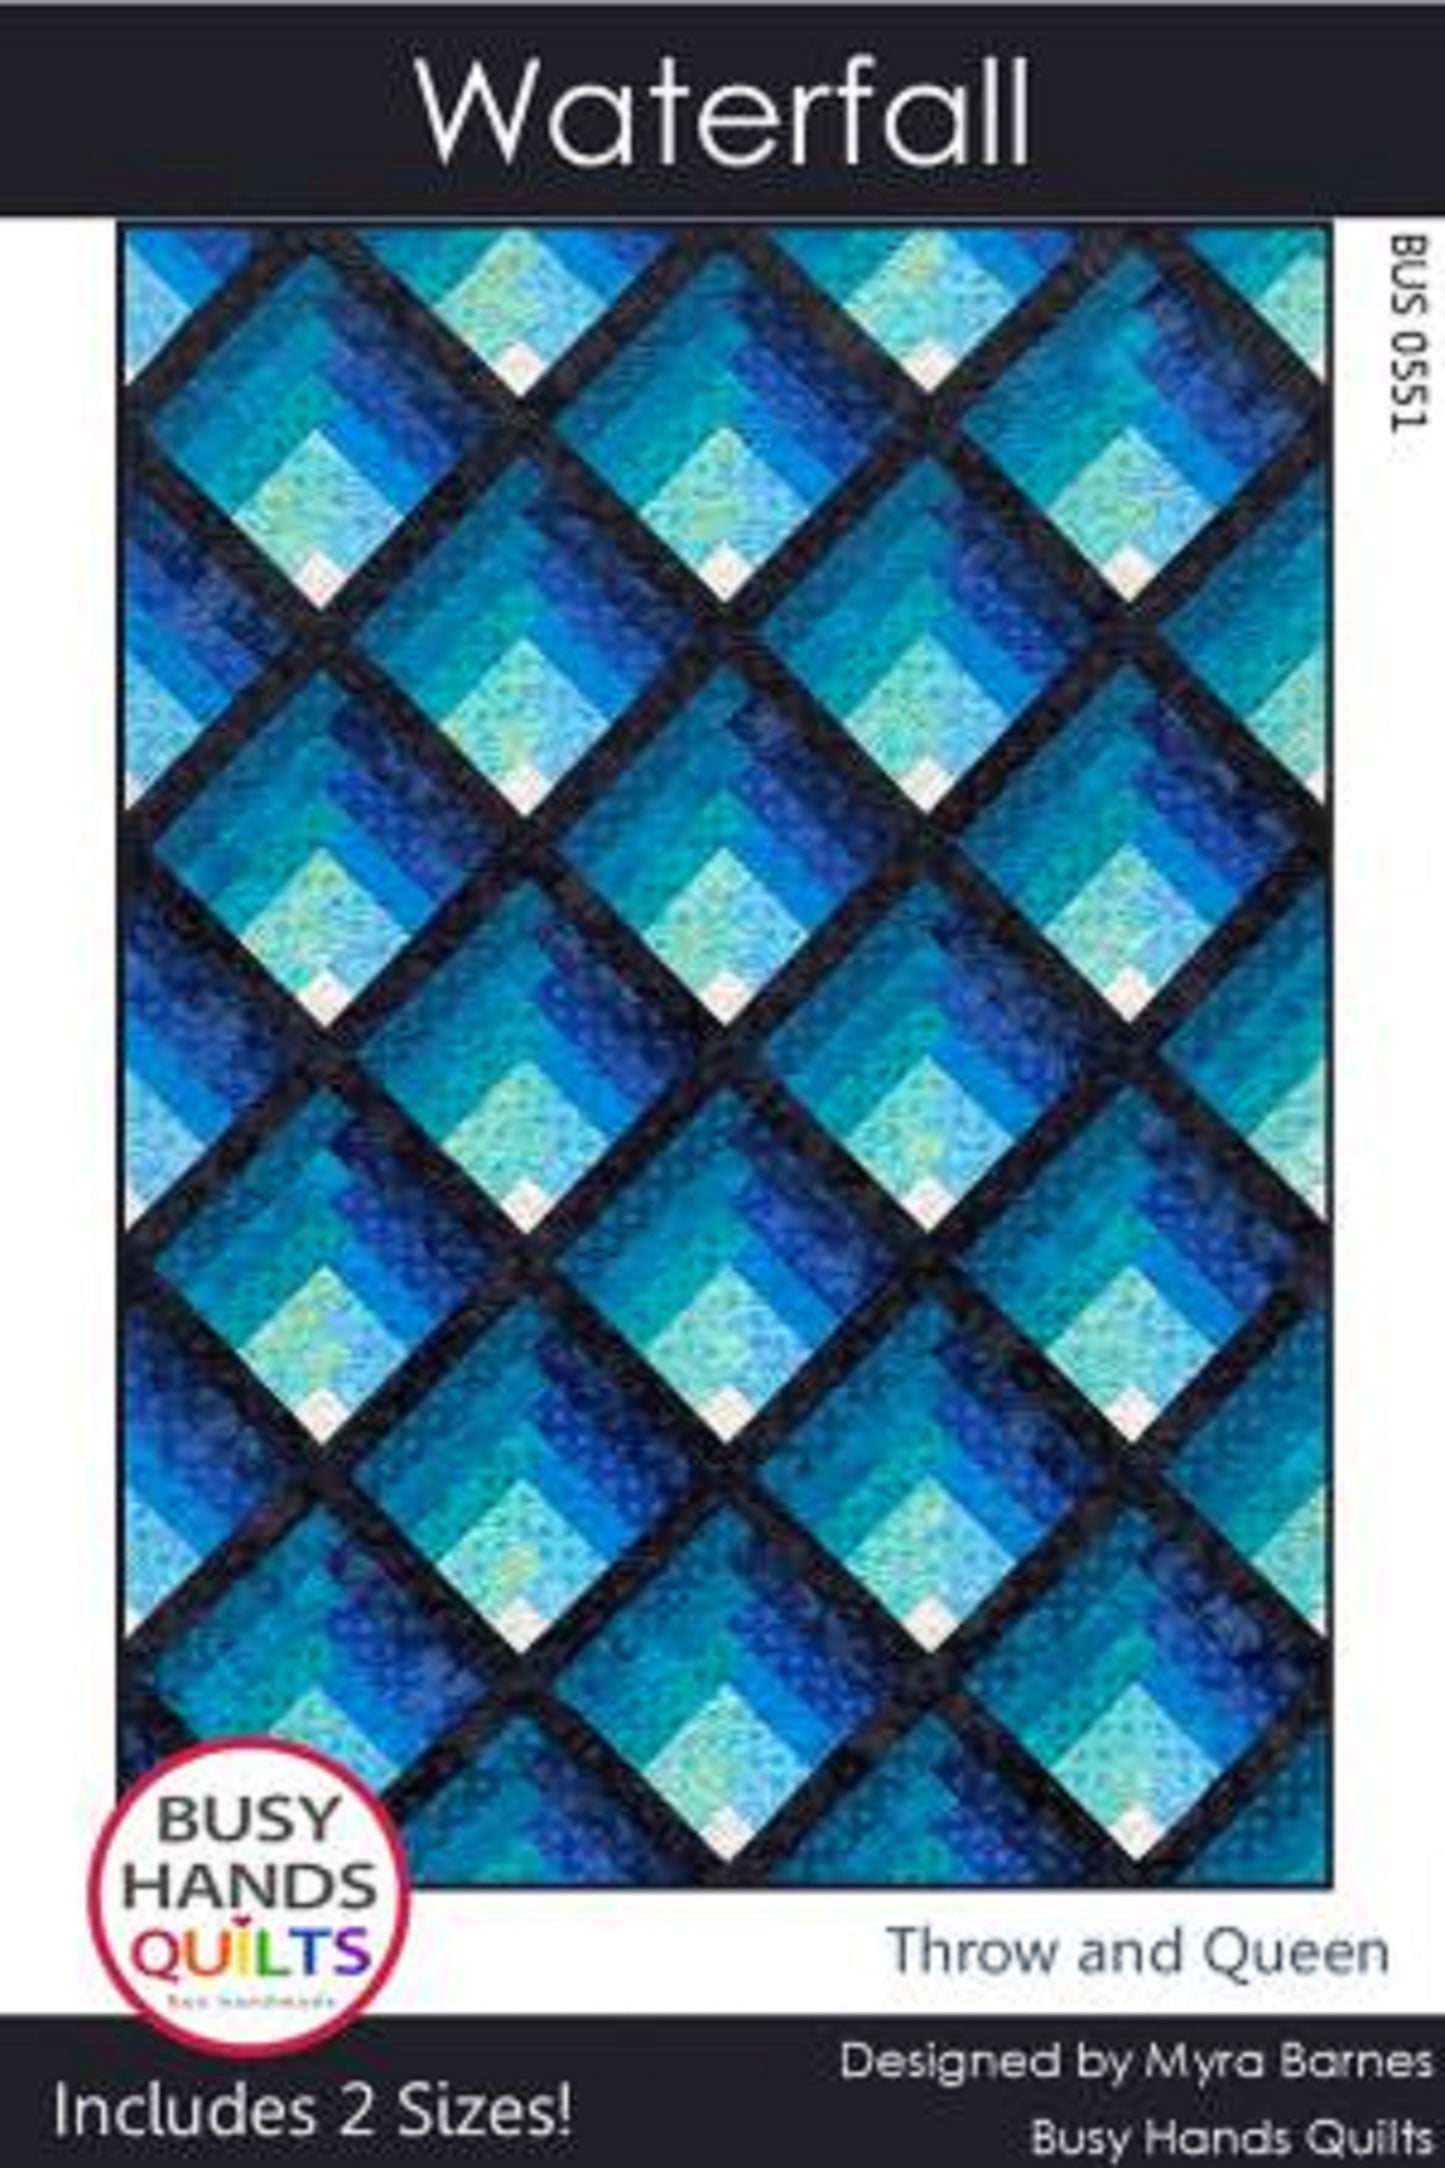 Waterfall Quilt Pattern by Busy Hands Quilts-Includes 2 Sizes